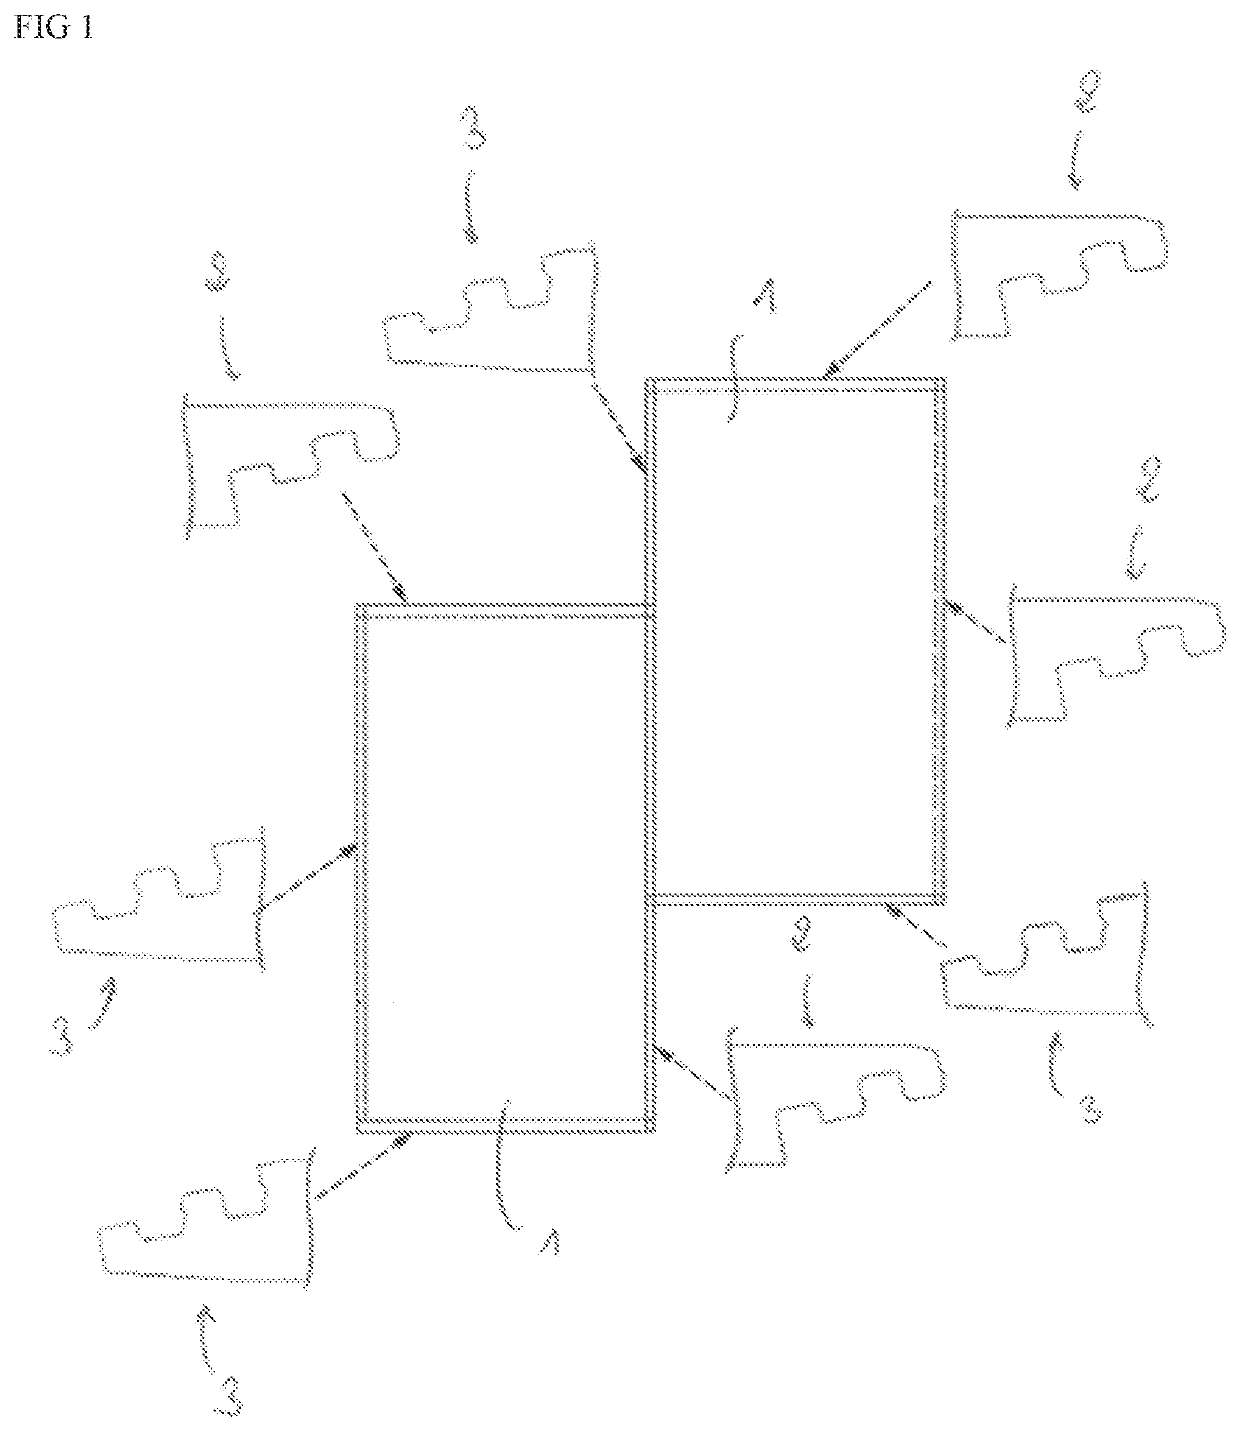 Panel with vertical assembly for producing a covering